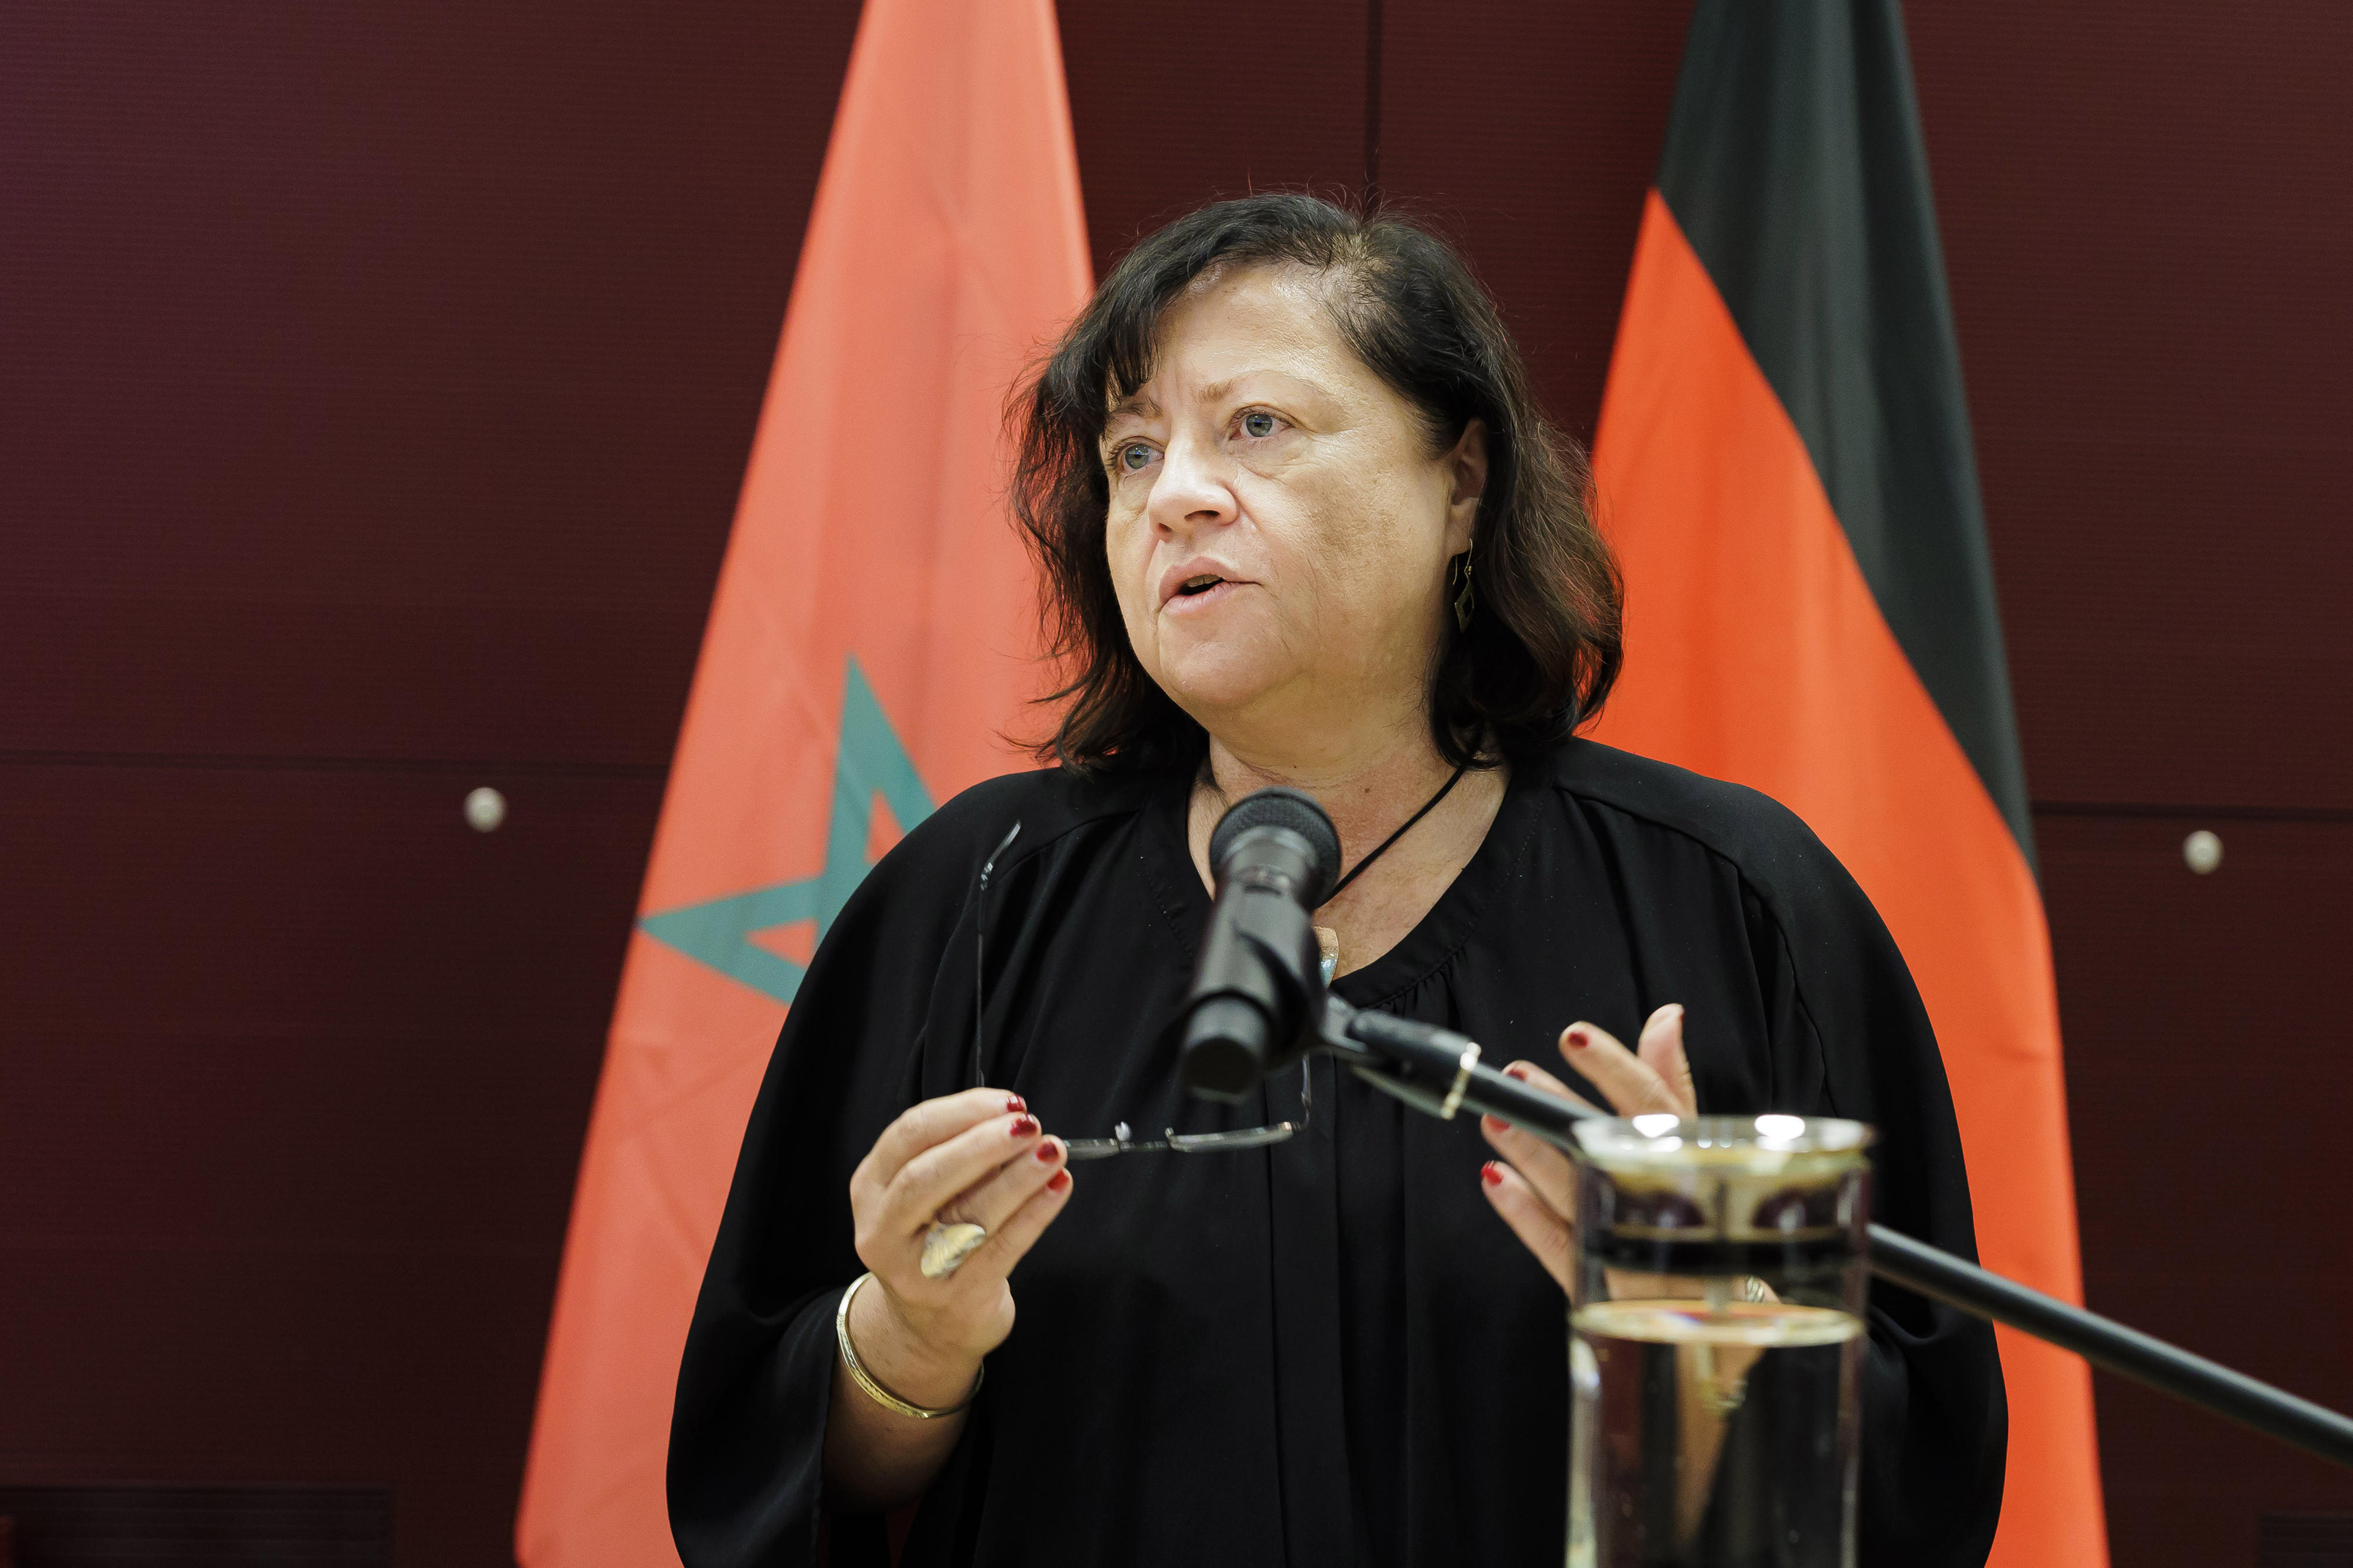 Parliamentary State Secretary Dr Bärbel Kofler at the government negotiations with Morocco